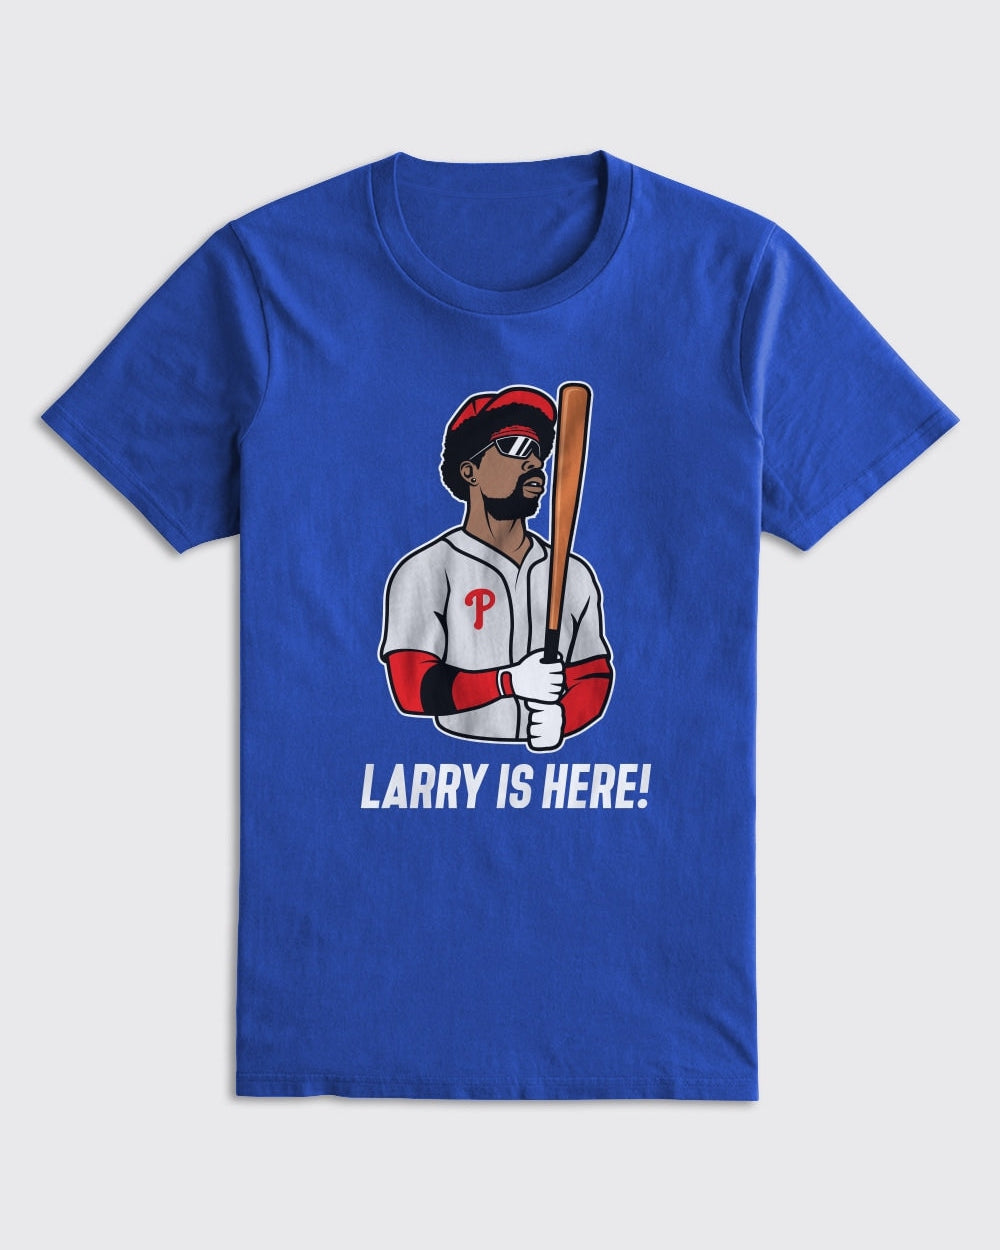 Philadelphia 76ers-Larry Is Here Shirt-True Royal-Philly Sports Shirts